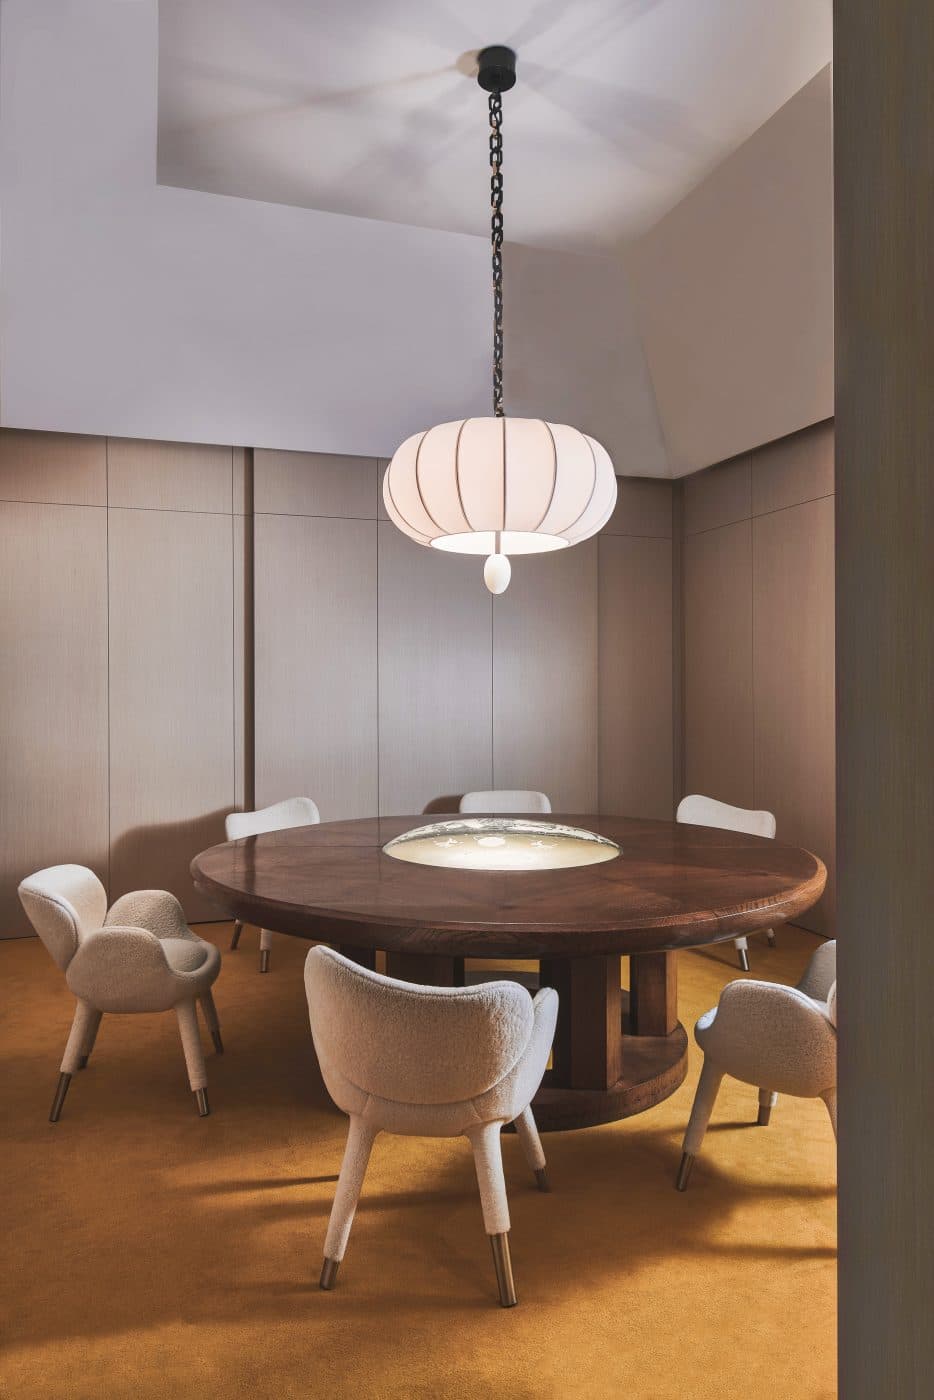 A private consultation room at the Achille Salvagni Atelier on Madison Avenue in New York